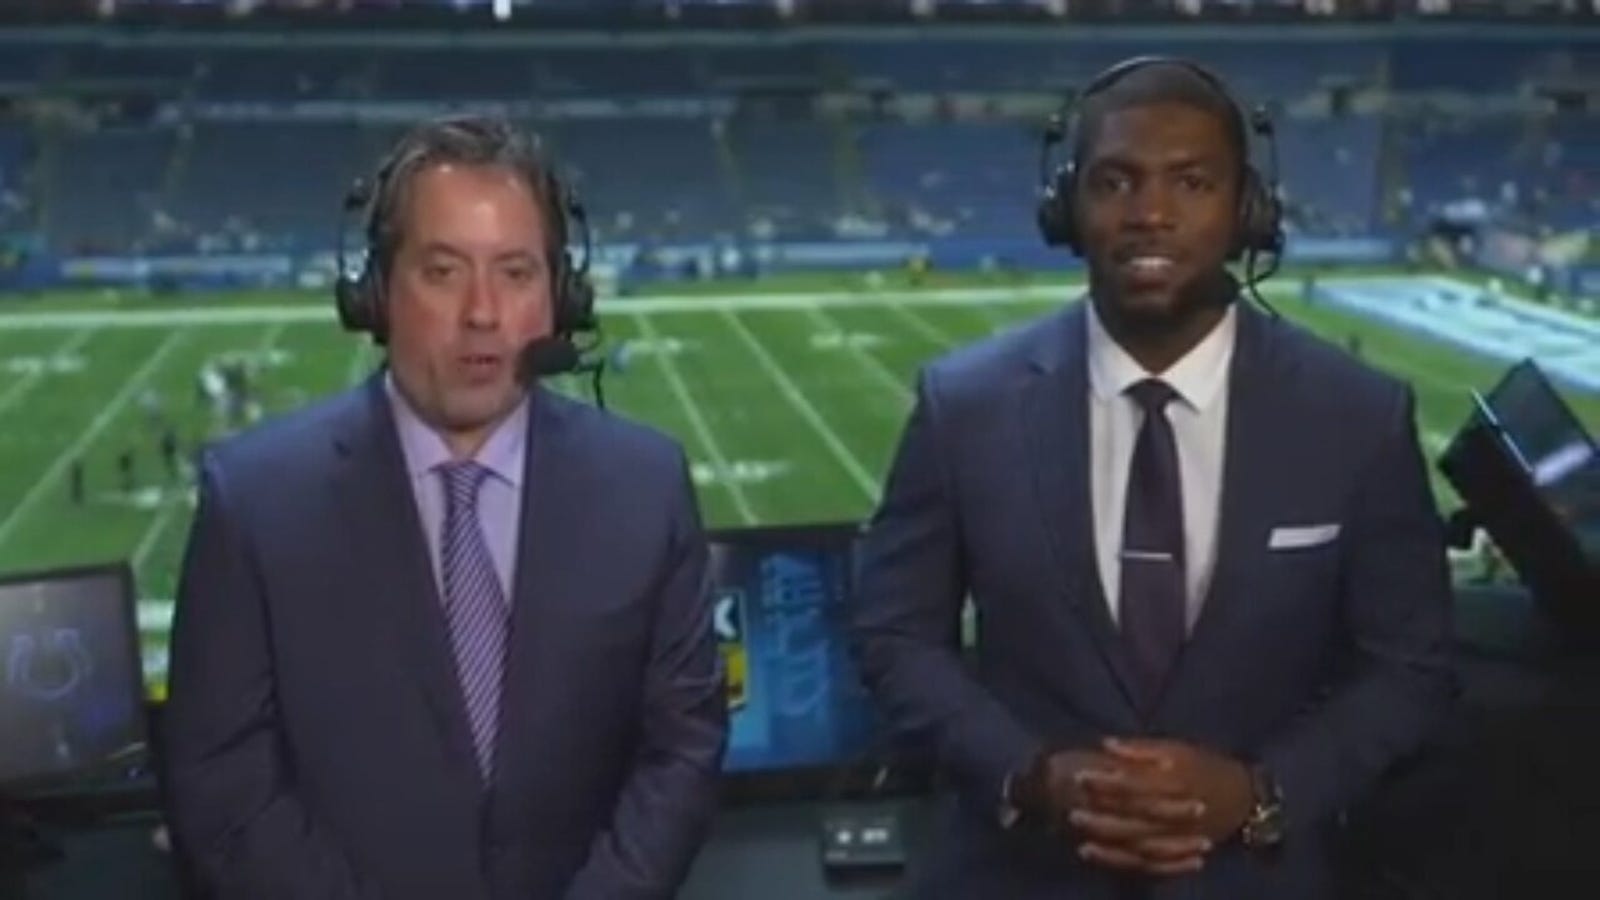 Kenny Albert and Jonathan Vilma recap the Jacksonville Jaguars' 31-21 win over the Indianapolis Colts